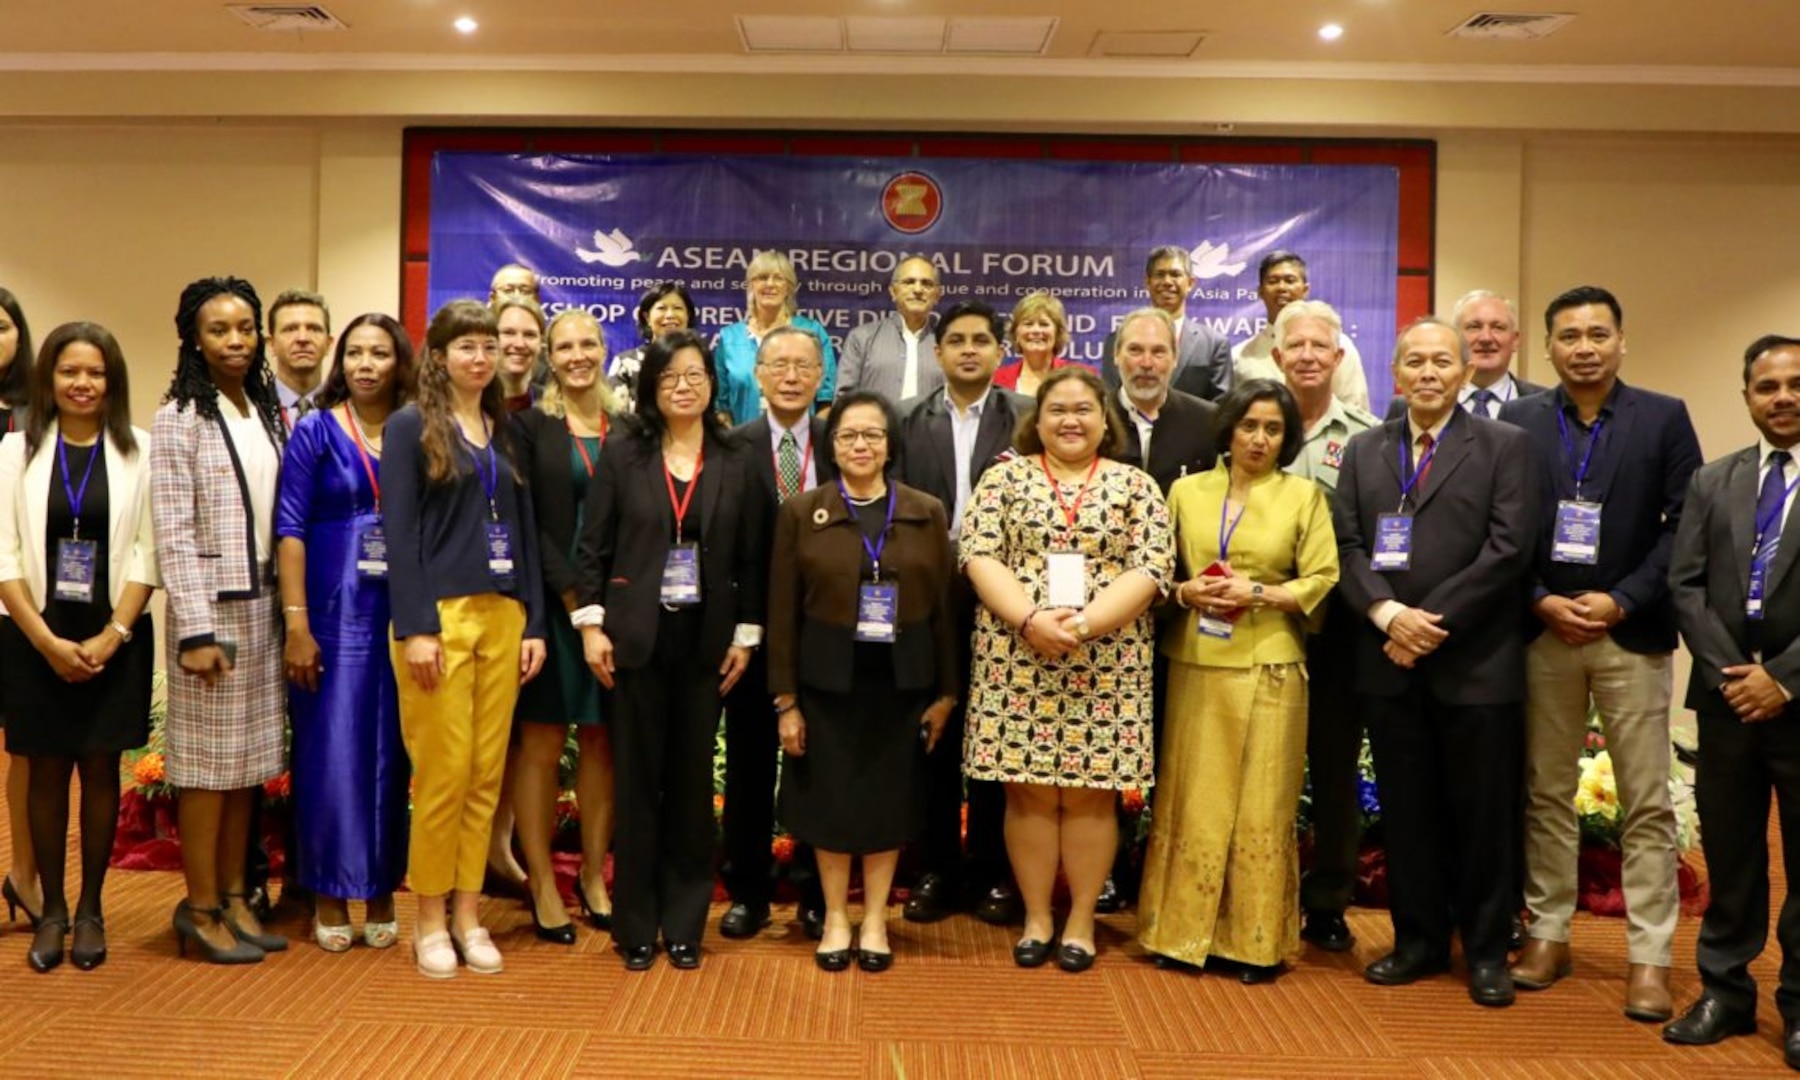 Ambassador Fitzpatrick Remarks at the Opening Ceremony of ASEAN Regional Forum Workshop on Preventive Diplomacy